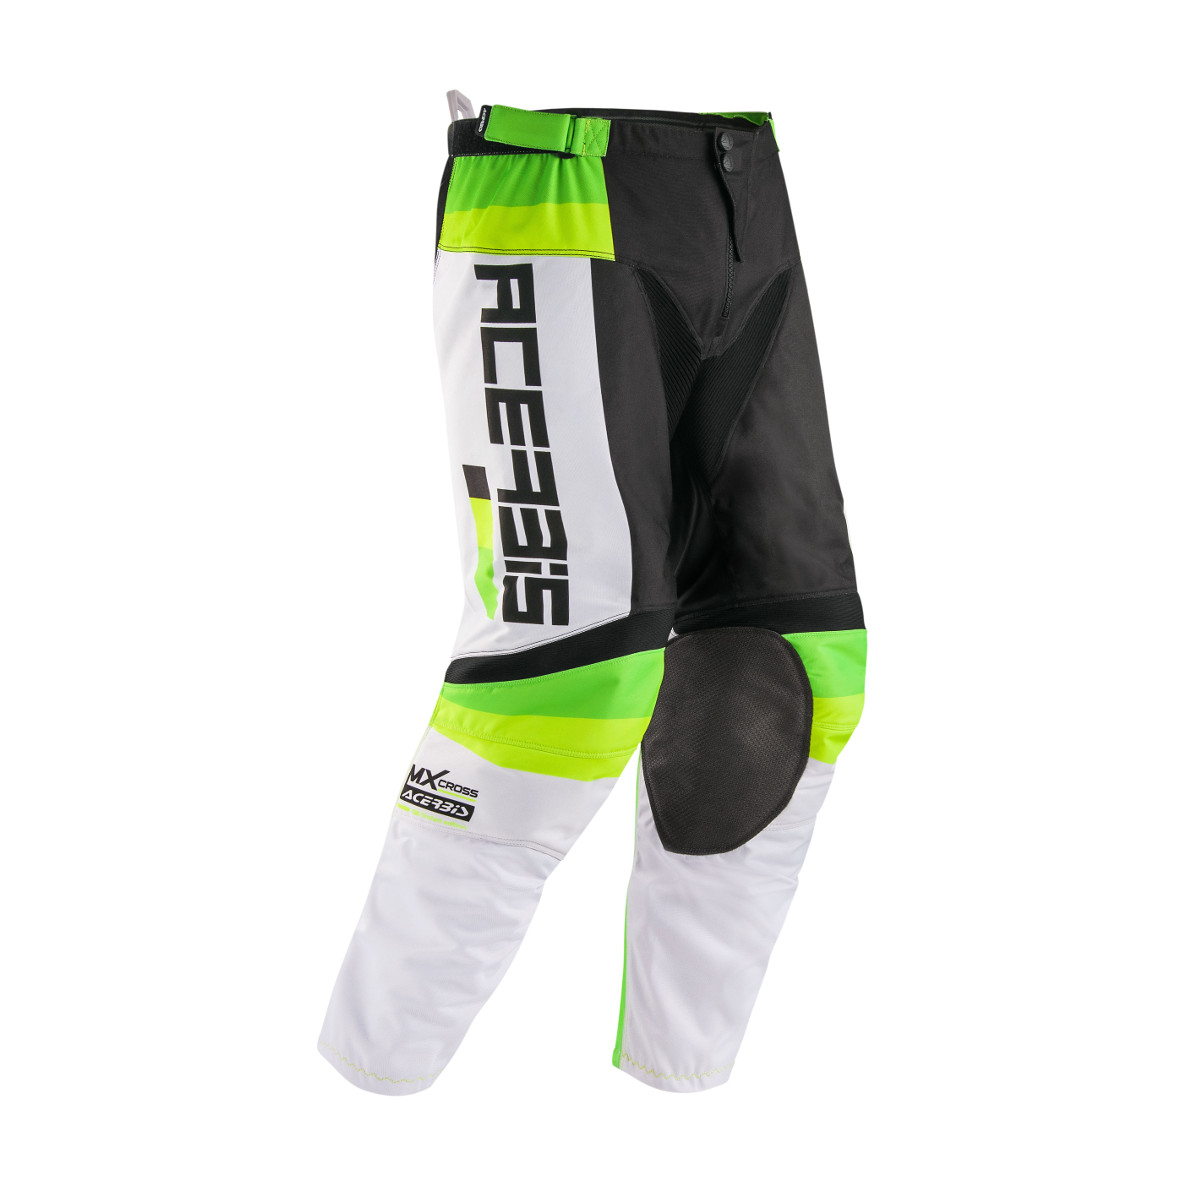 Acerbis Pantaloni MX Limited Edition Spacelord - Nero/Verde